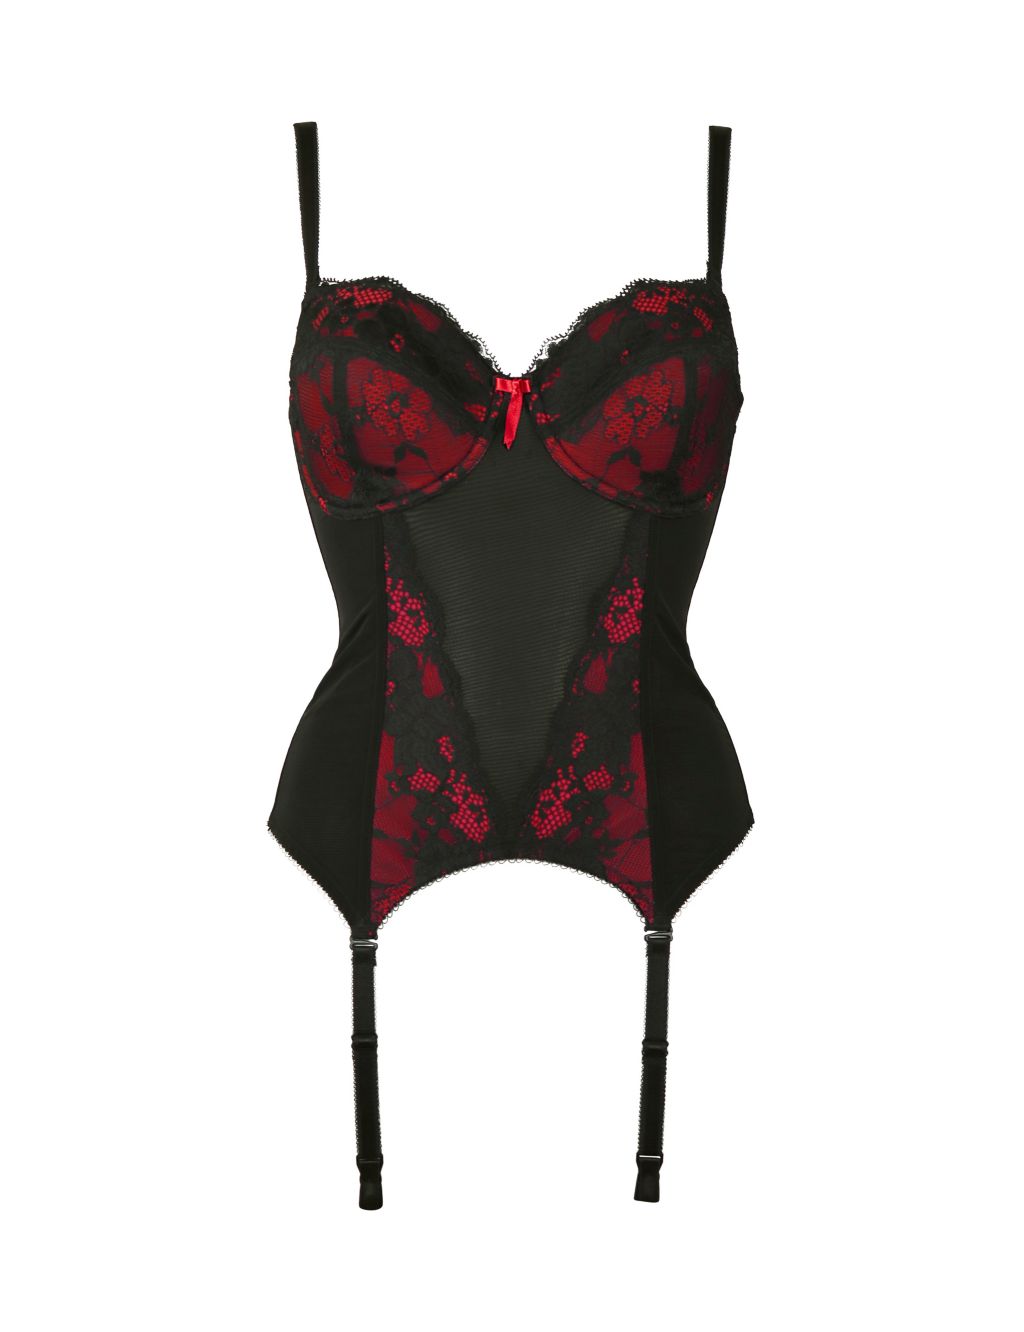 Amour Wired Basque (C-F) image 2